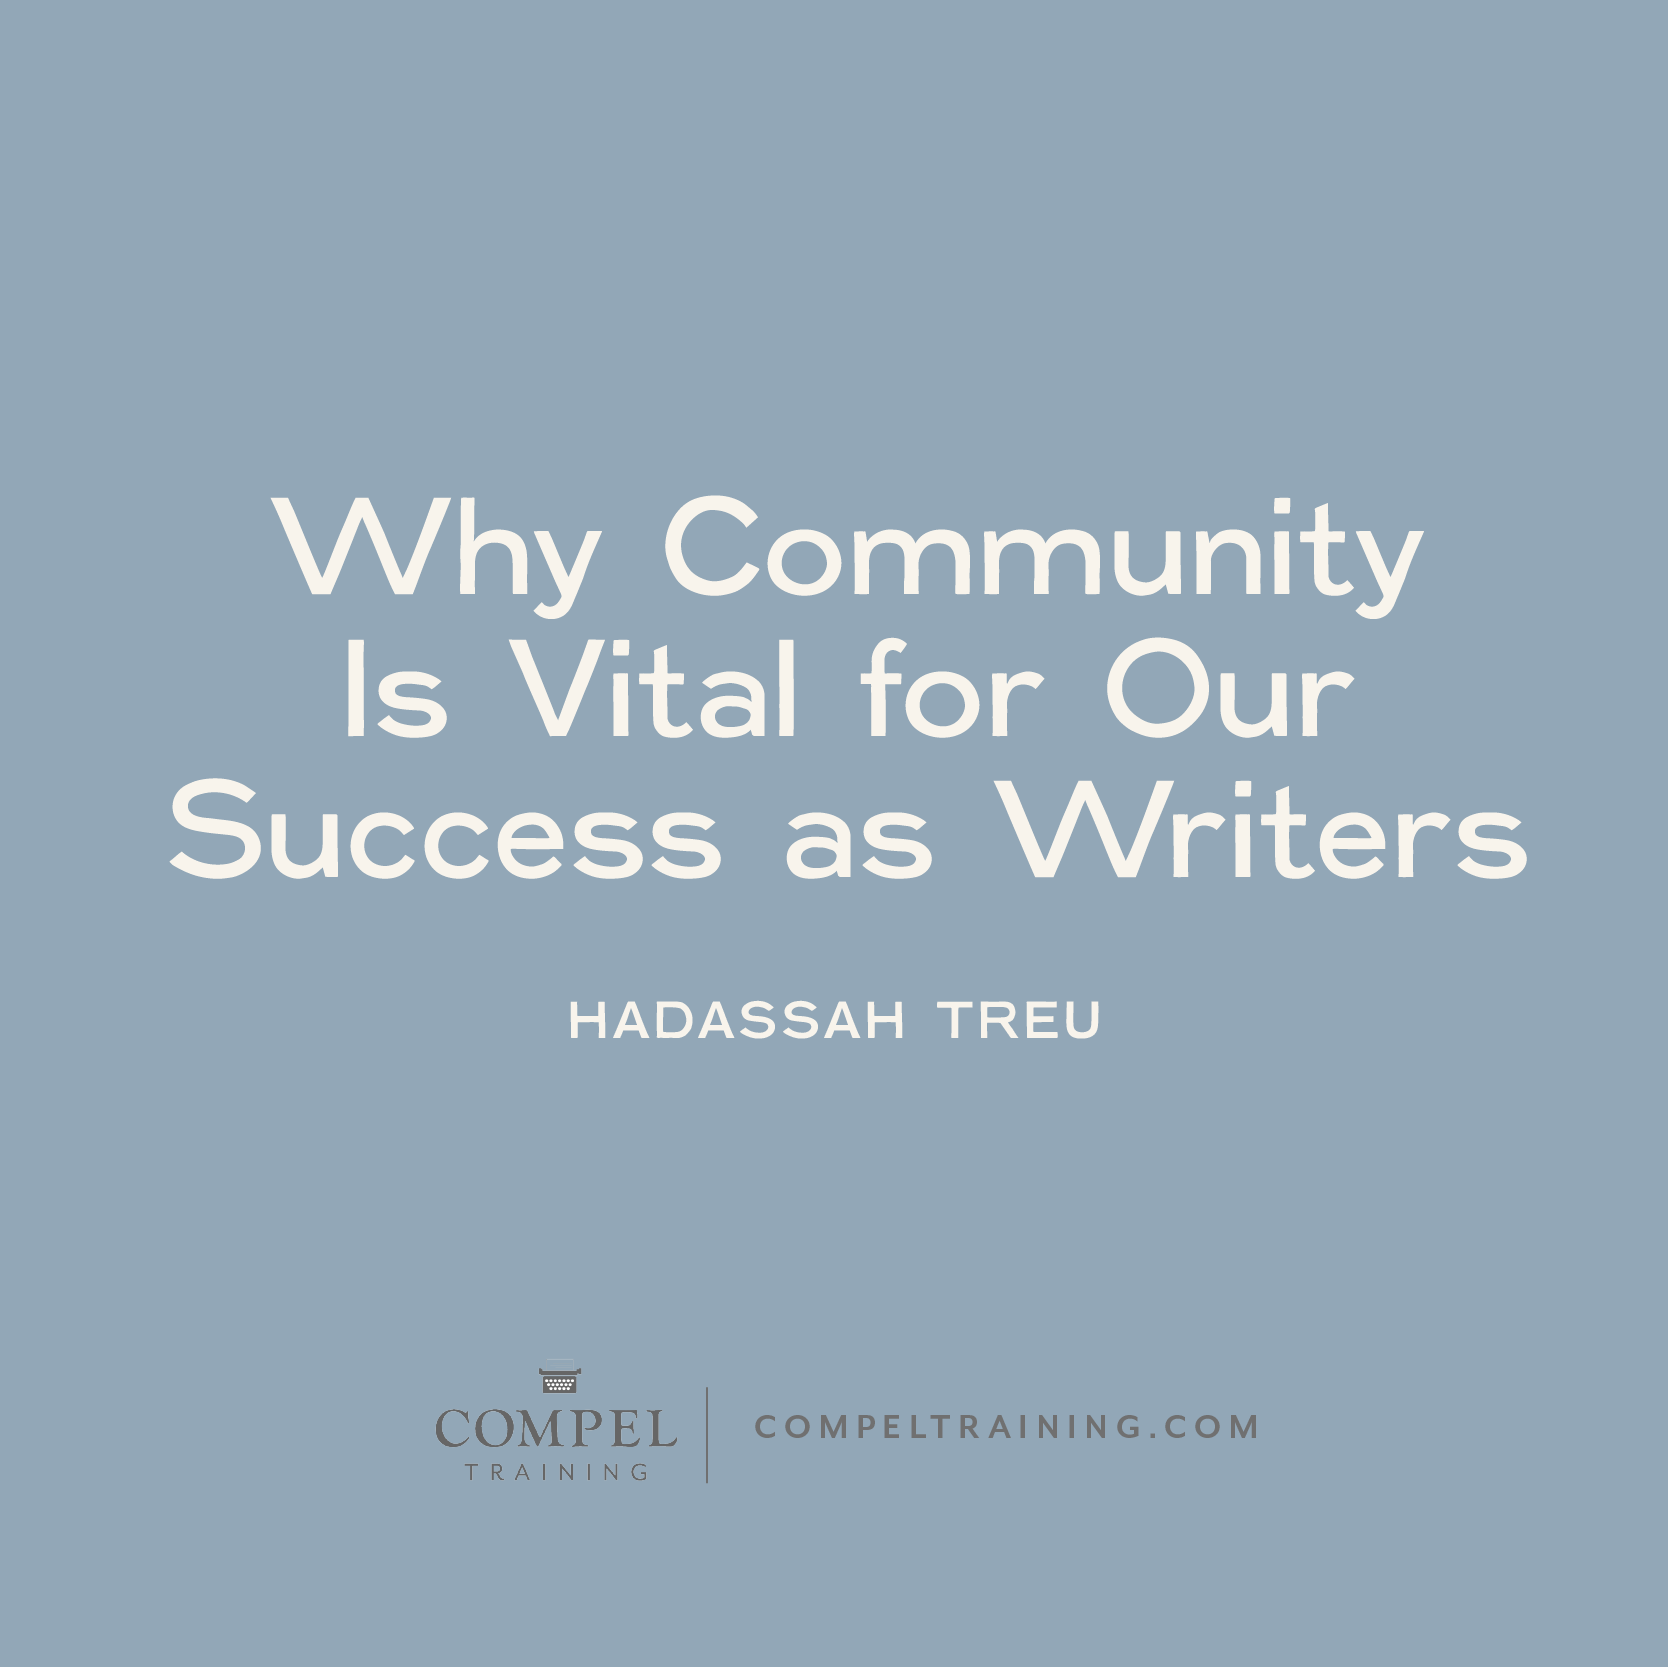 Here at COMPEL, we take the idea of a community very seriously. We think it’s a vital part of our writing lives. It’s important to surround yourselves with other like-minded people who just get you. Here are four reasons being a part of a supportive community influences and inspires your journey as a writer …